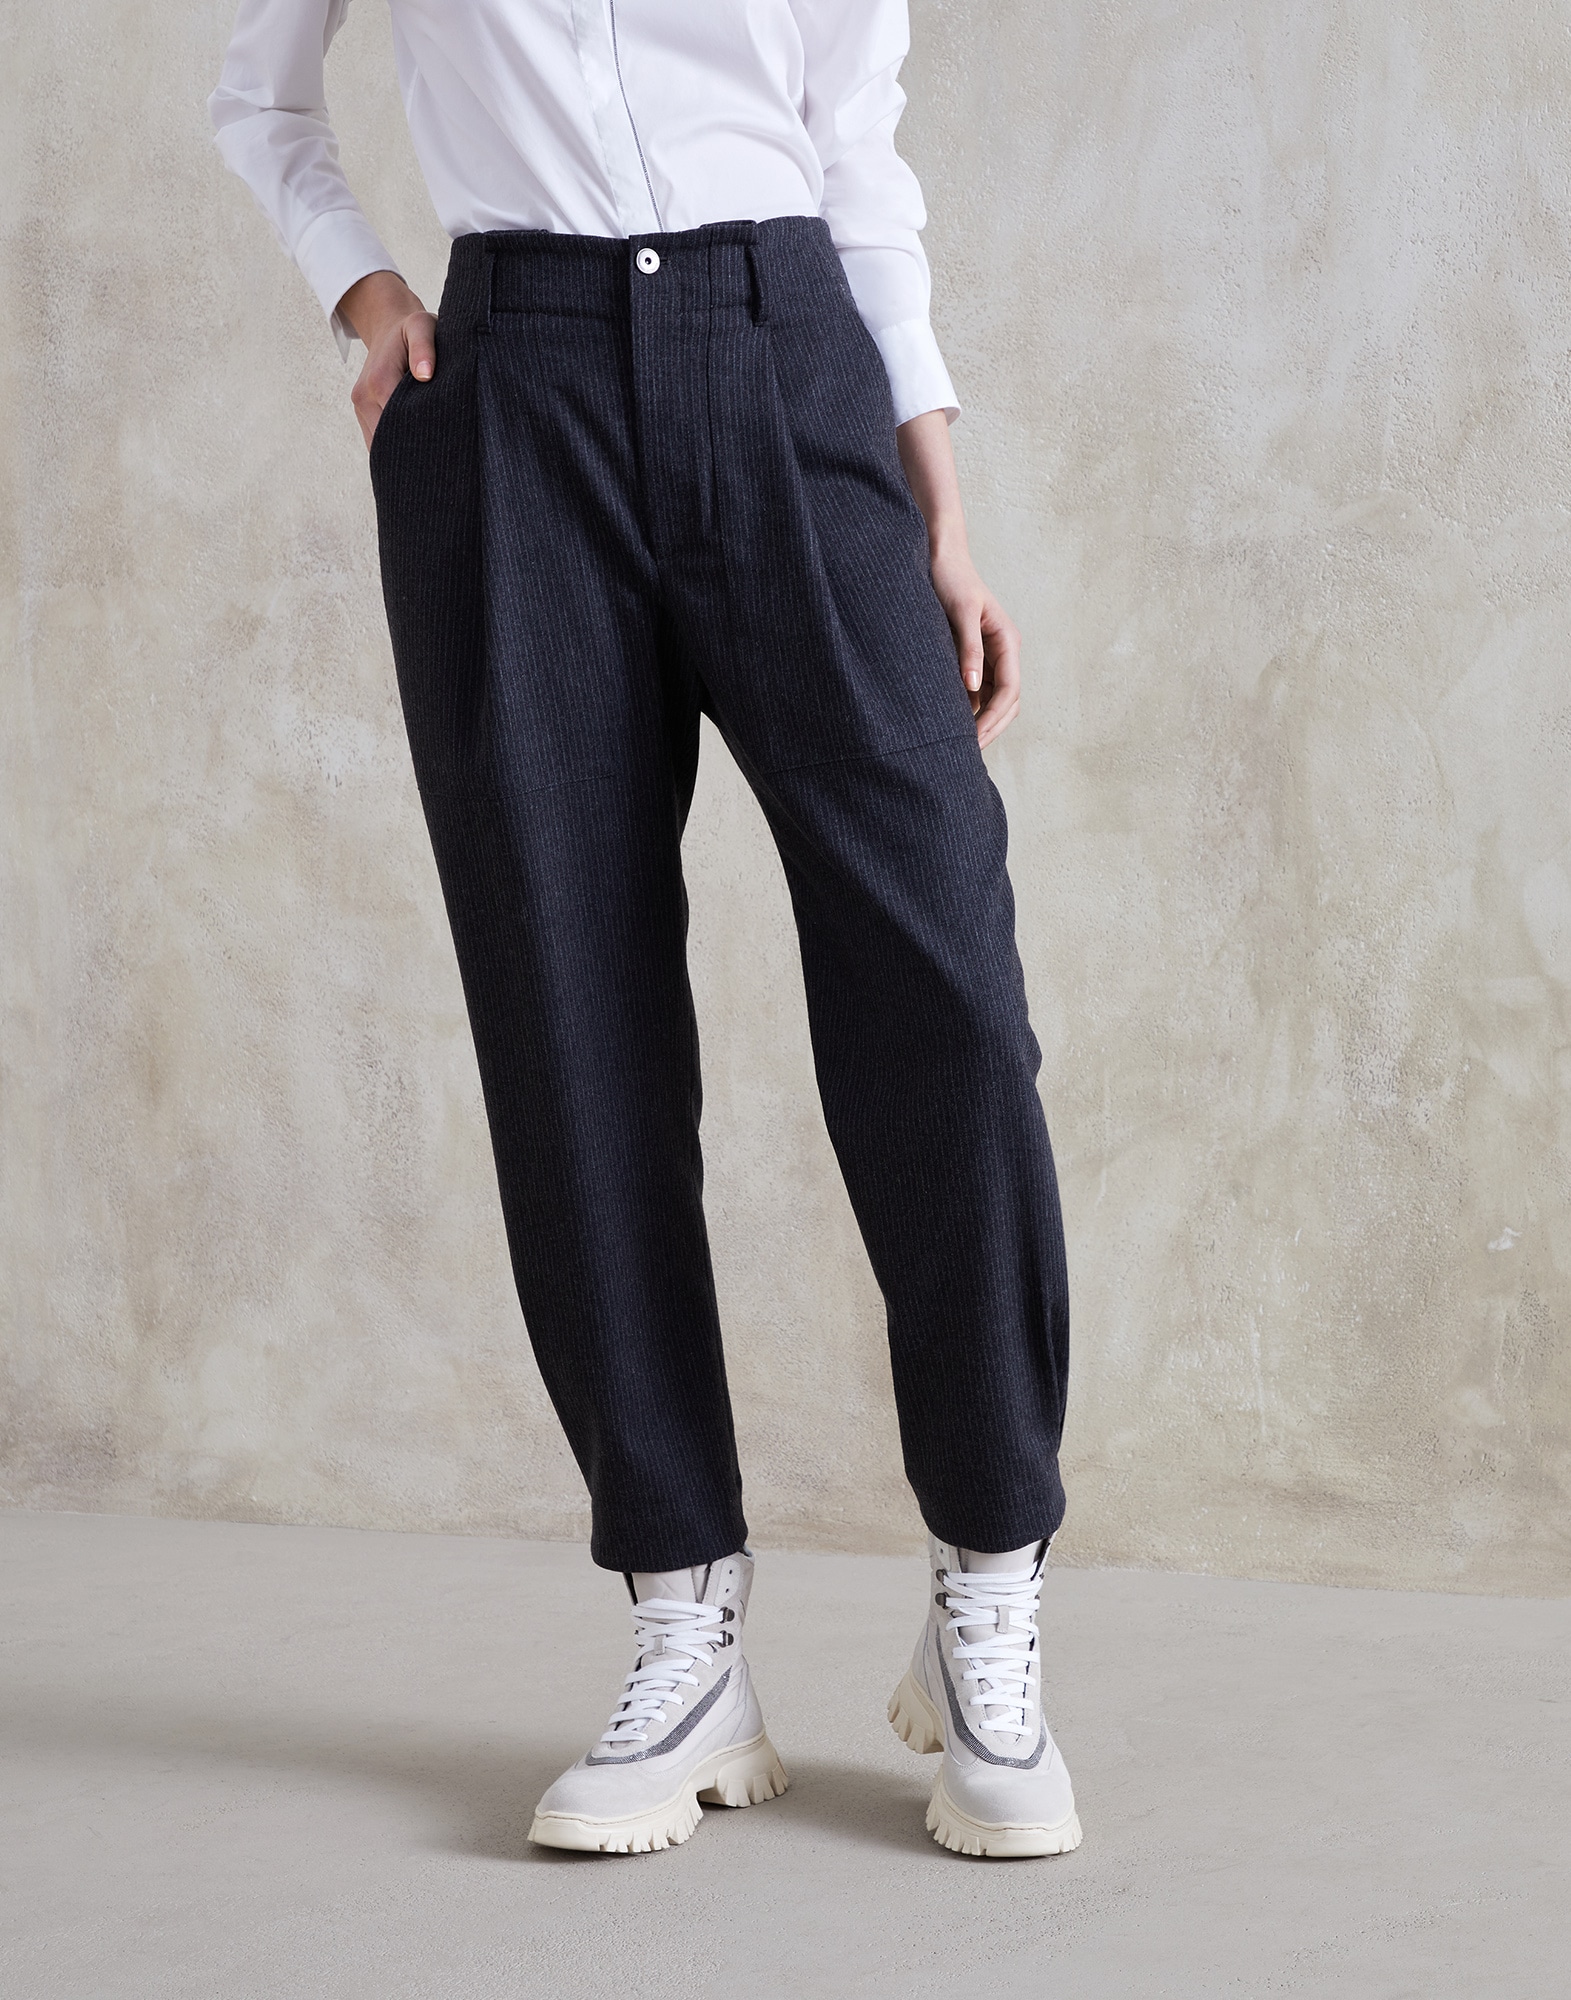 Sartorial utility trousers